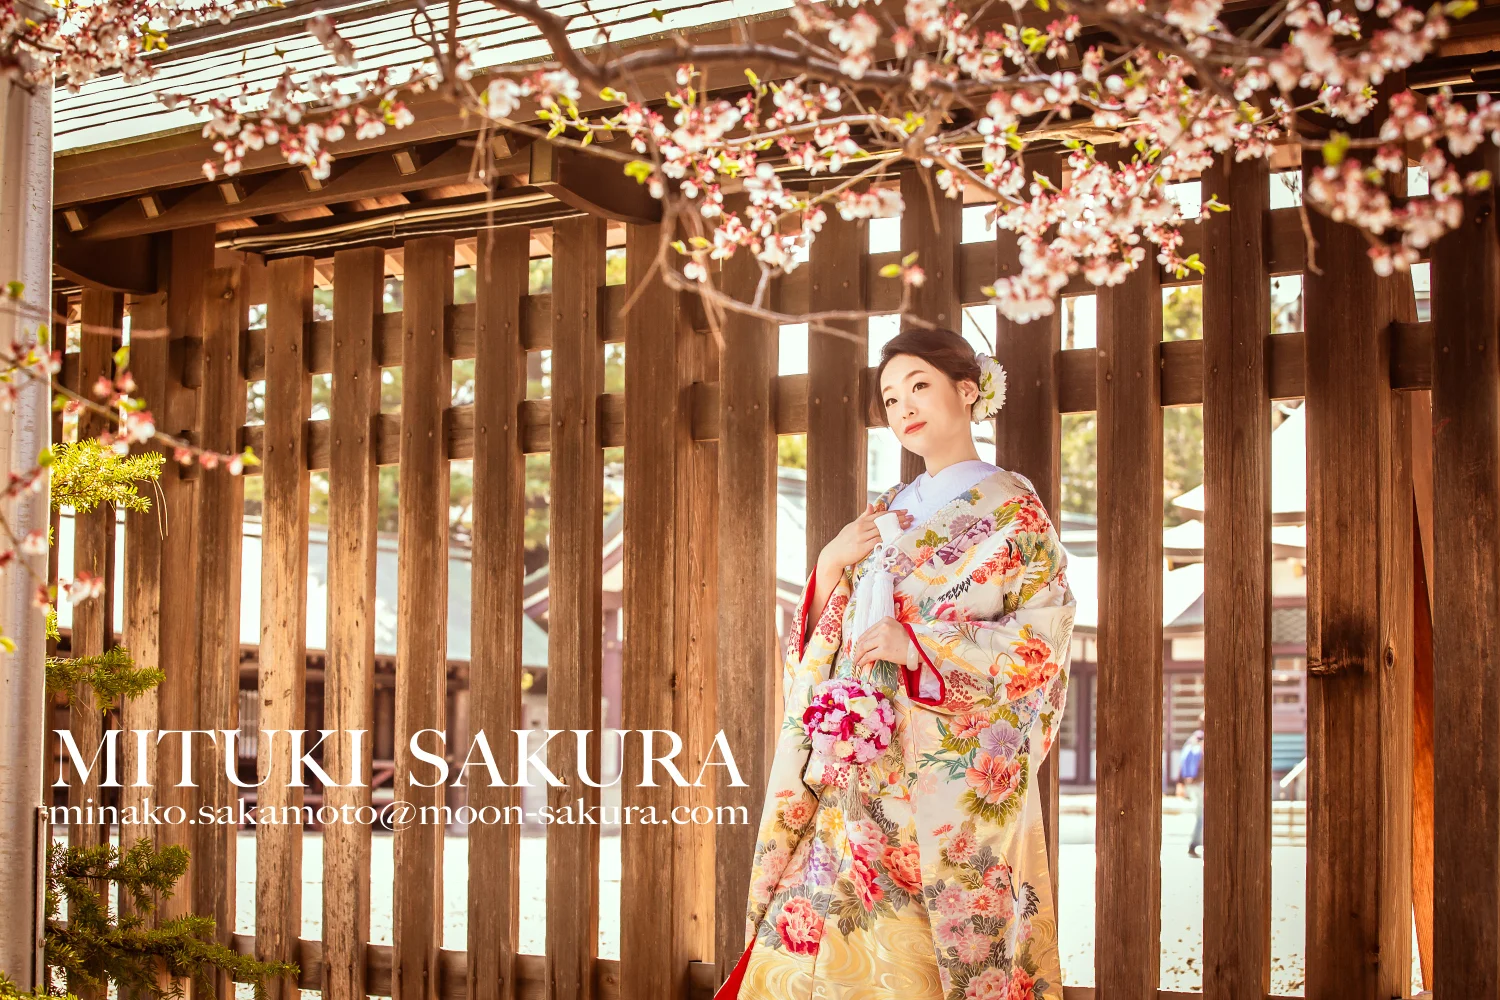 Enjoy strolling through the streets of Sapporo wearing luxurious furisode.